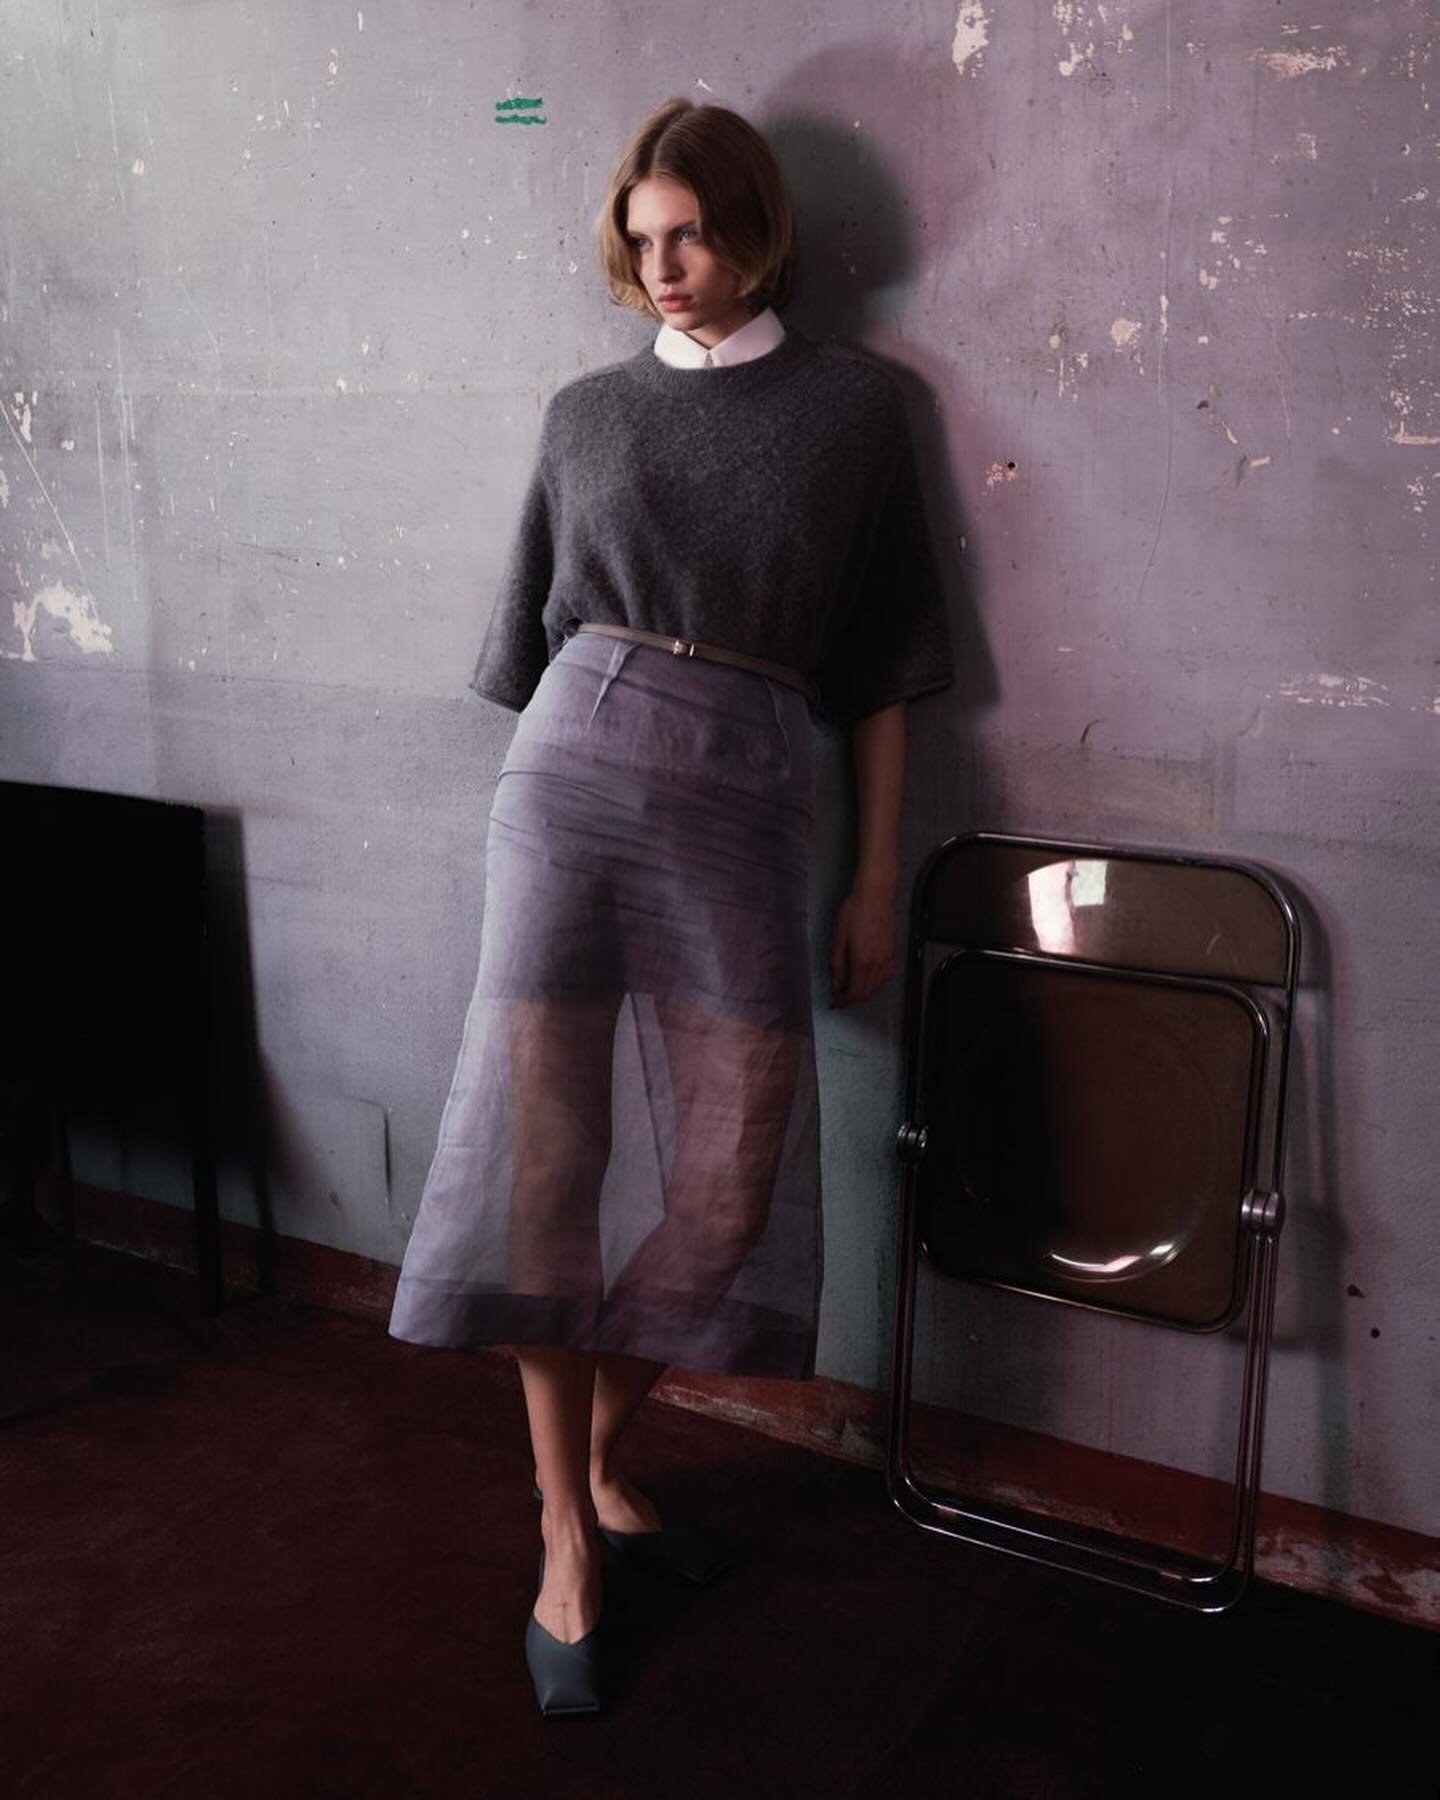 @carven by @louise_trotter_ featured in @selfservicemagazine 
@suzannekoller 
@ezrapetronio 
@carven